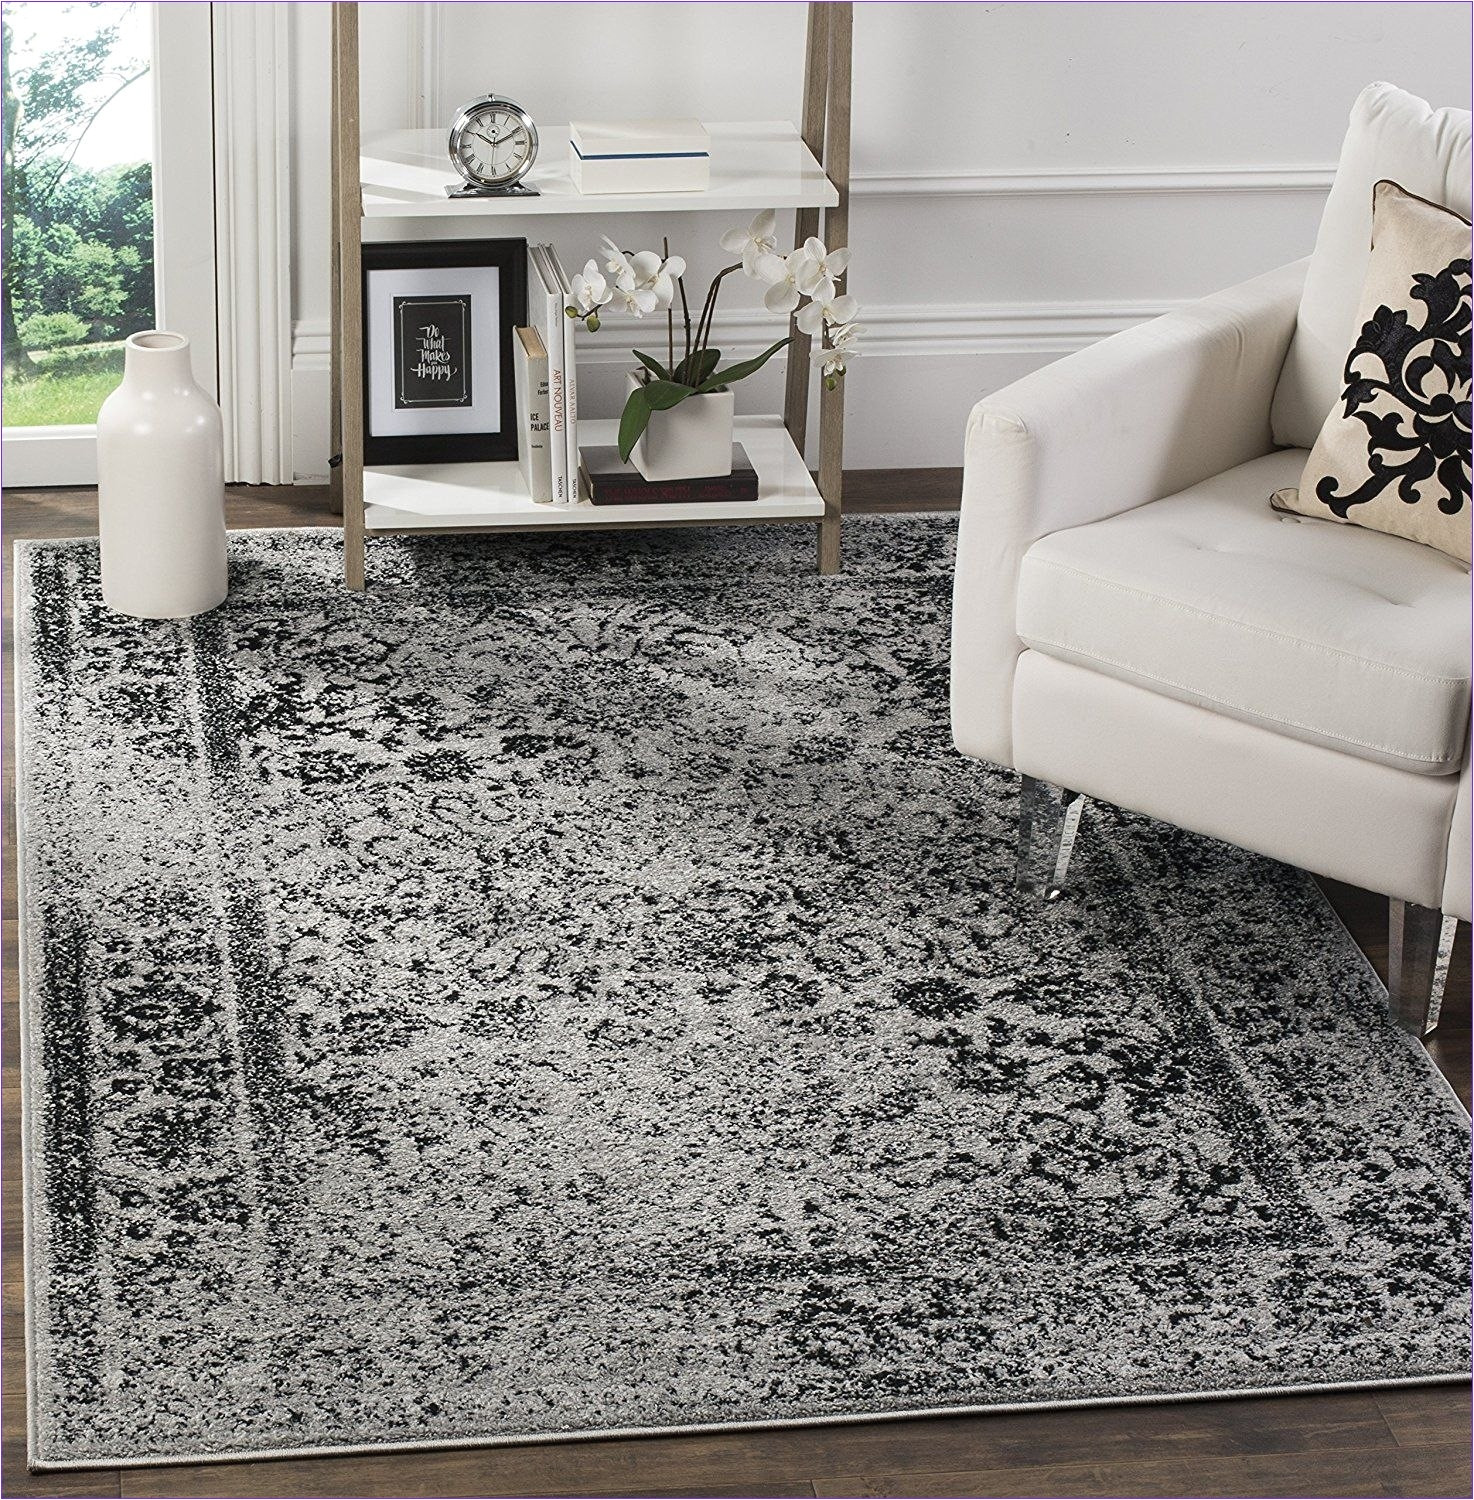 26 Lovable Grey Hardwood Floors Living Room 2024 free download grey hardwood floors living room of tahari home area rugs livextrend the carpets were beautiful in tahari home area rugs livextrend the carpets were beautiful